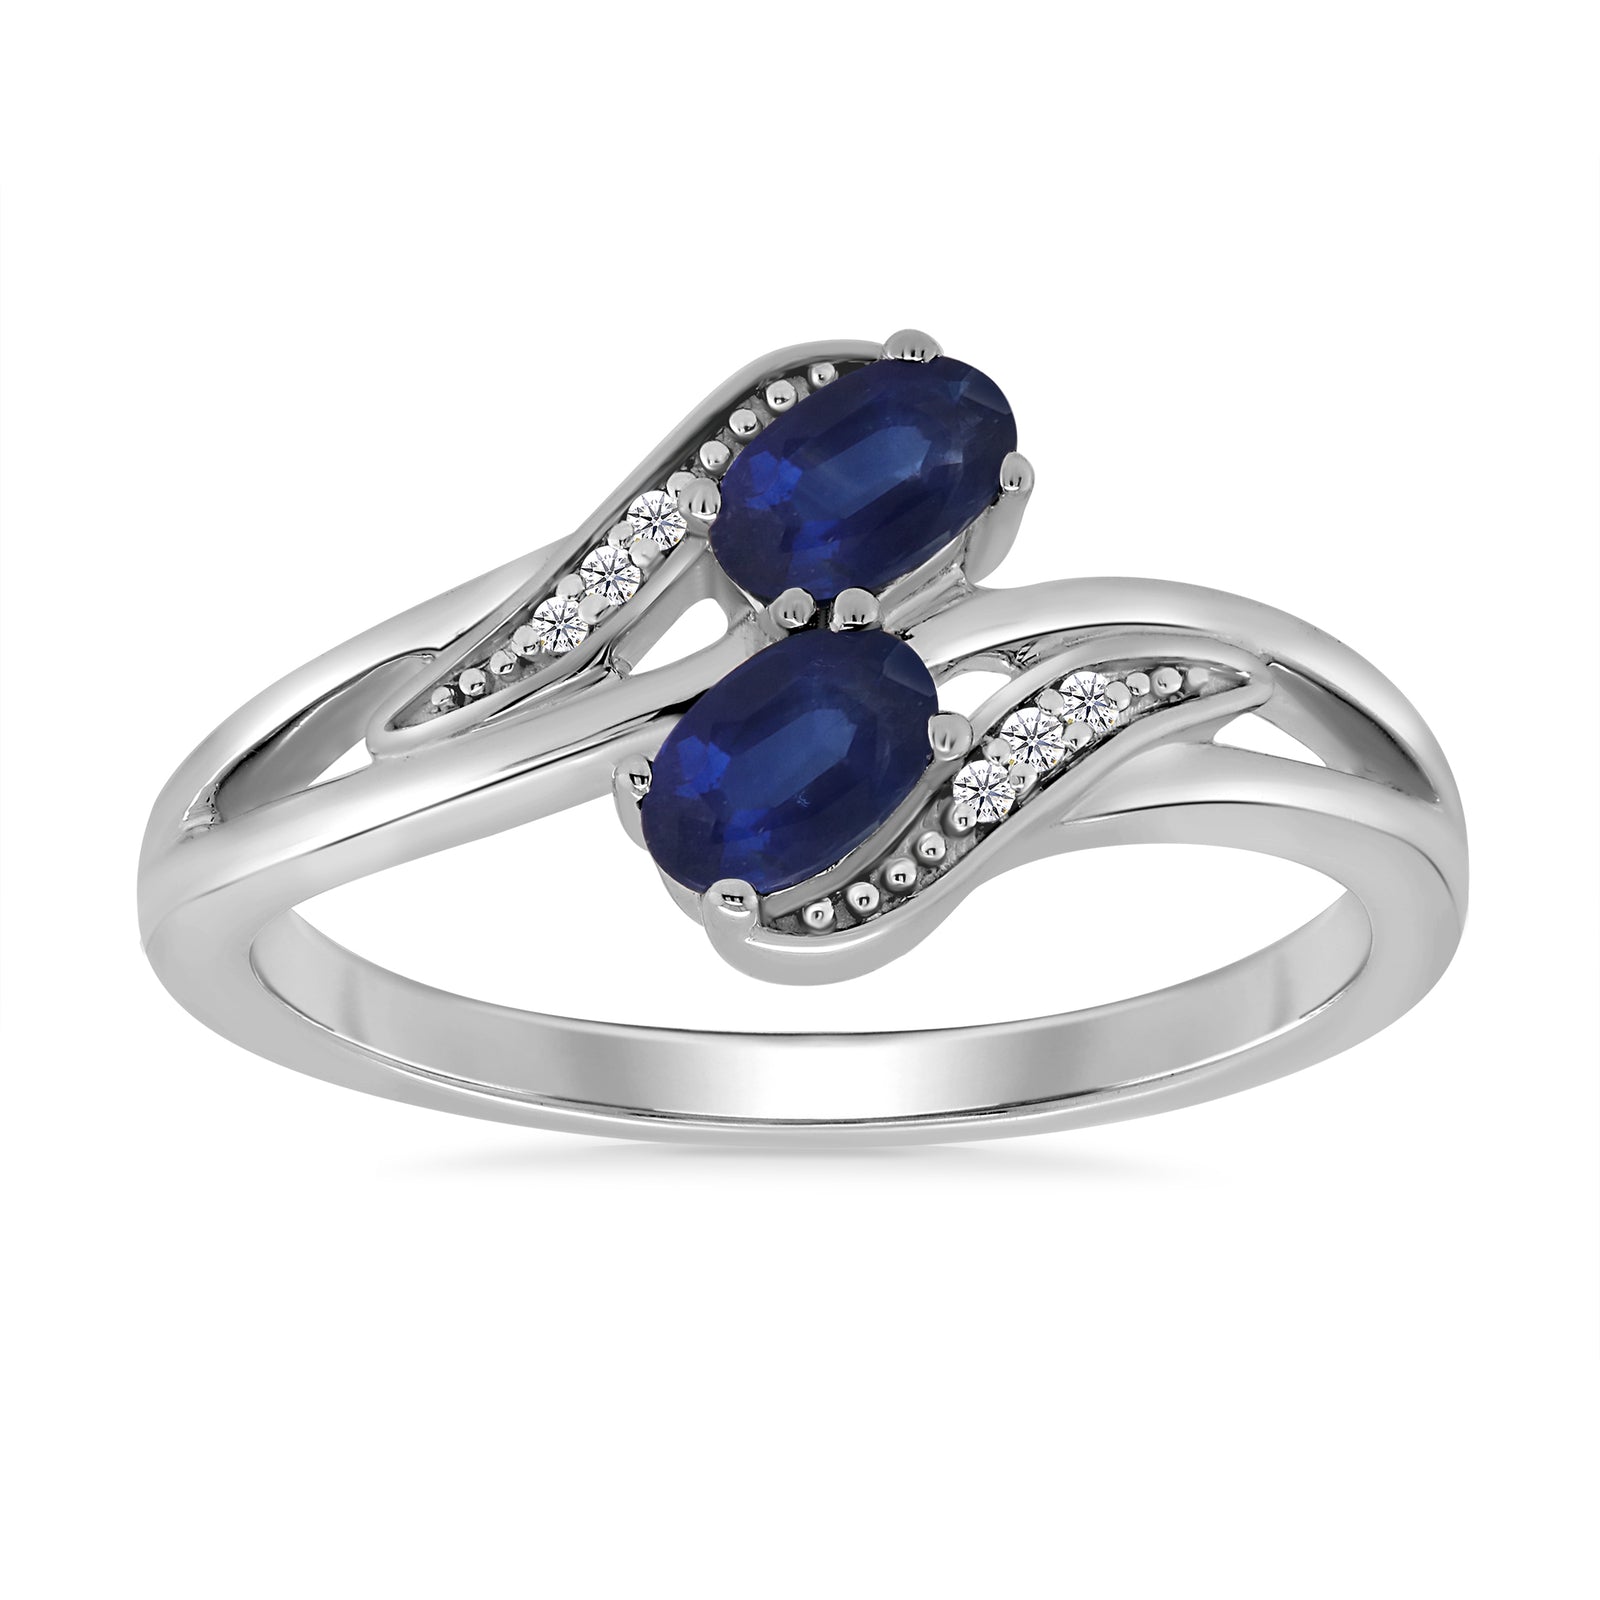 9ct white gold 5x3mm oval sapphires & diamond cross over ring 0.02ct